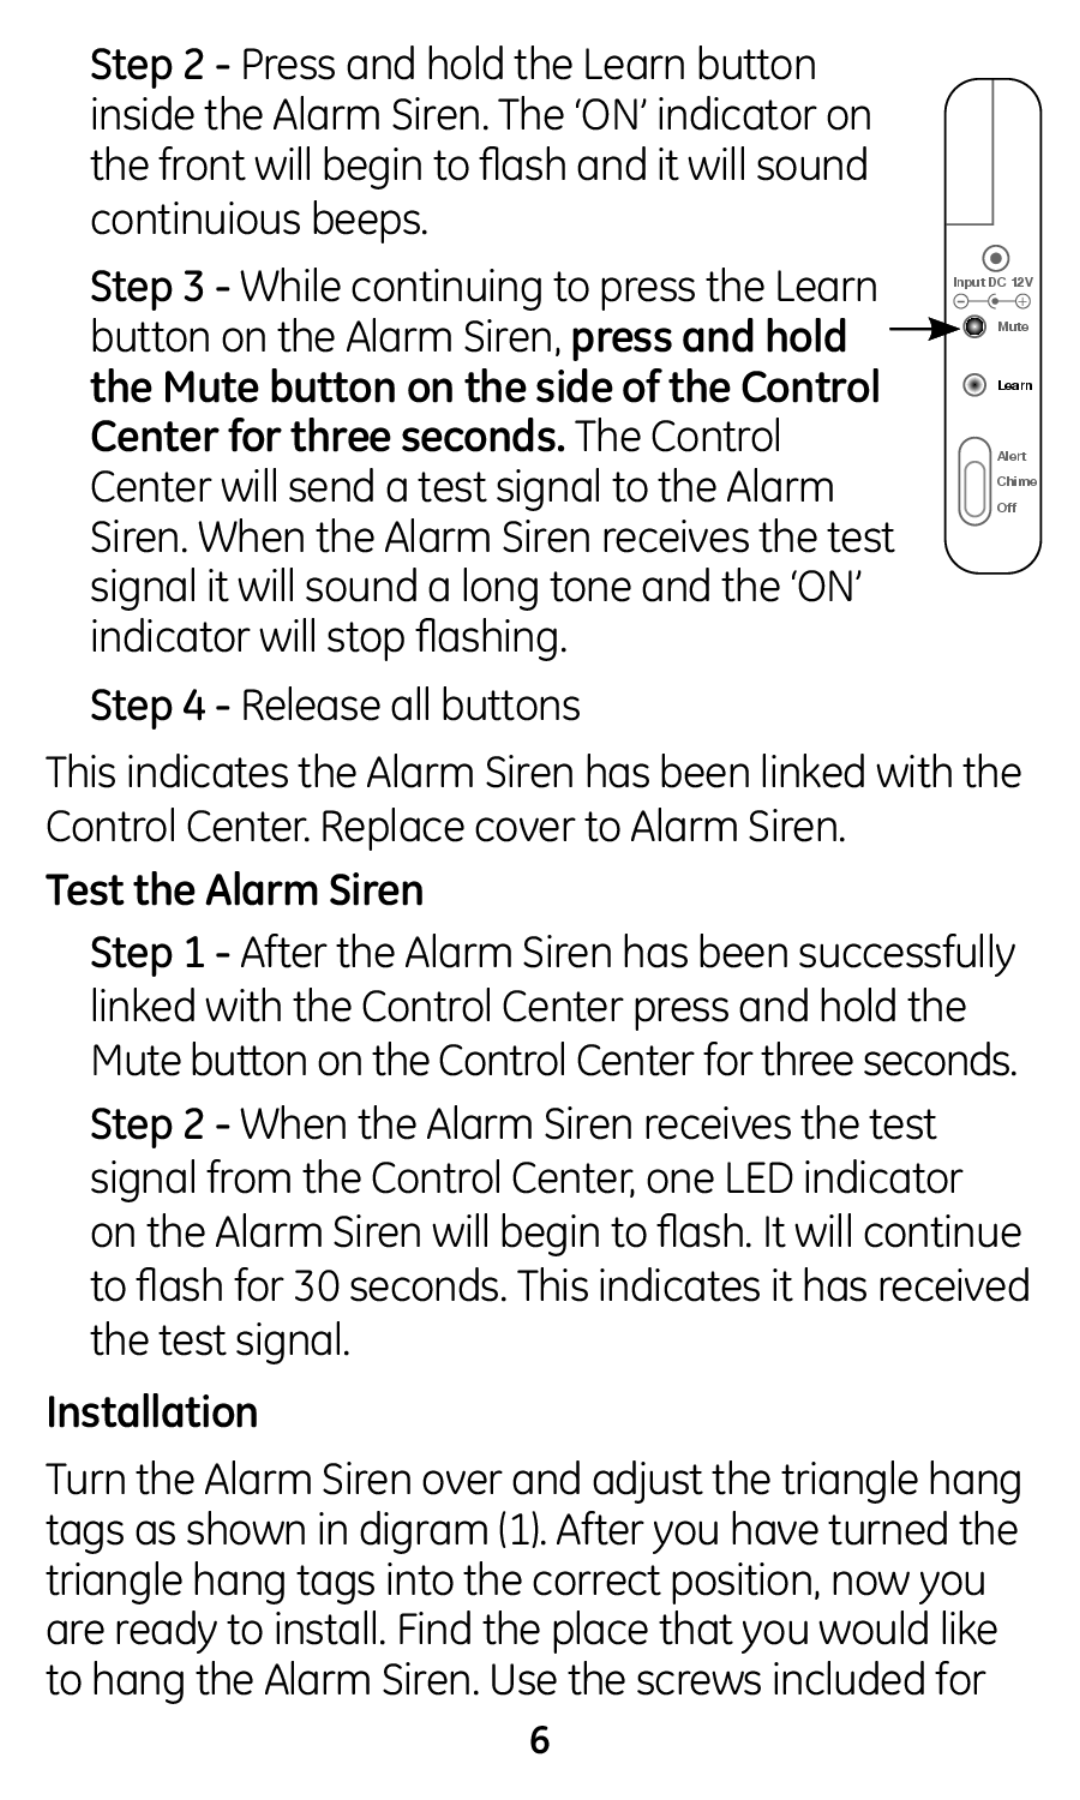 GE 45136 user manual Release all buttons, Test the Alarm Siren, Installation 